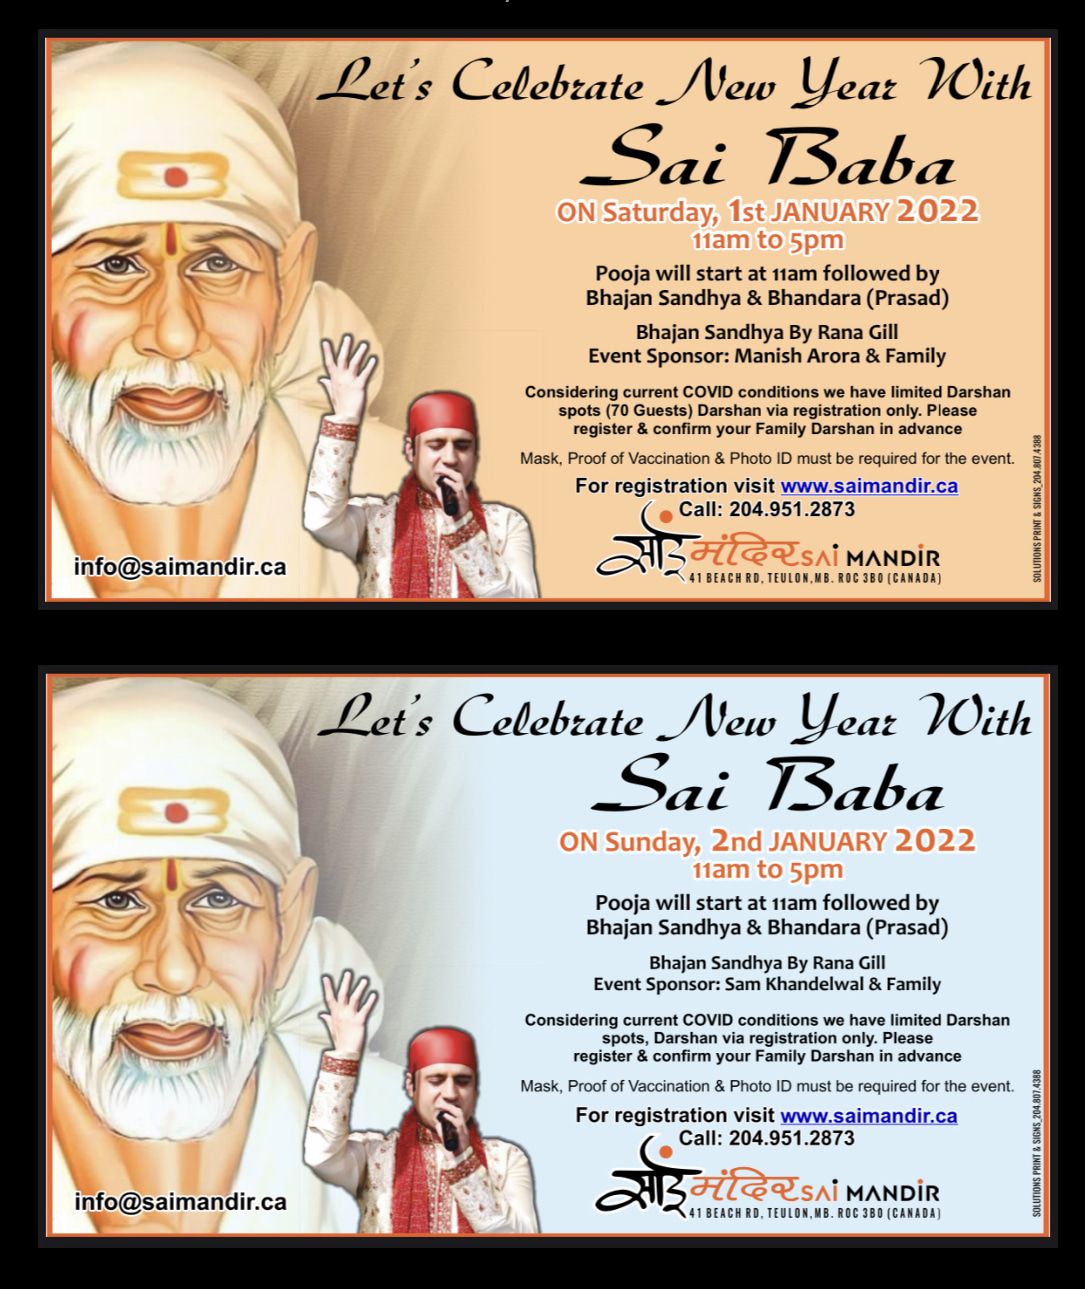 Let's celebrate the new year with Sai Baba